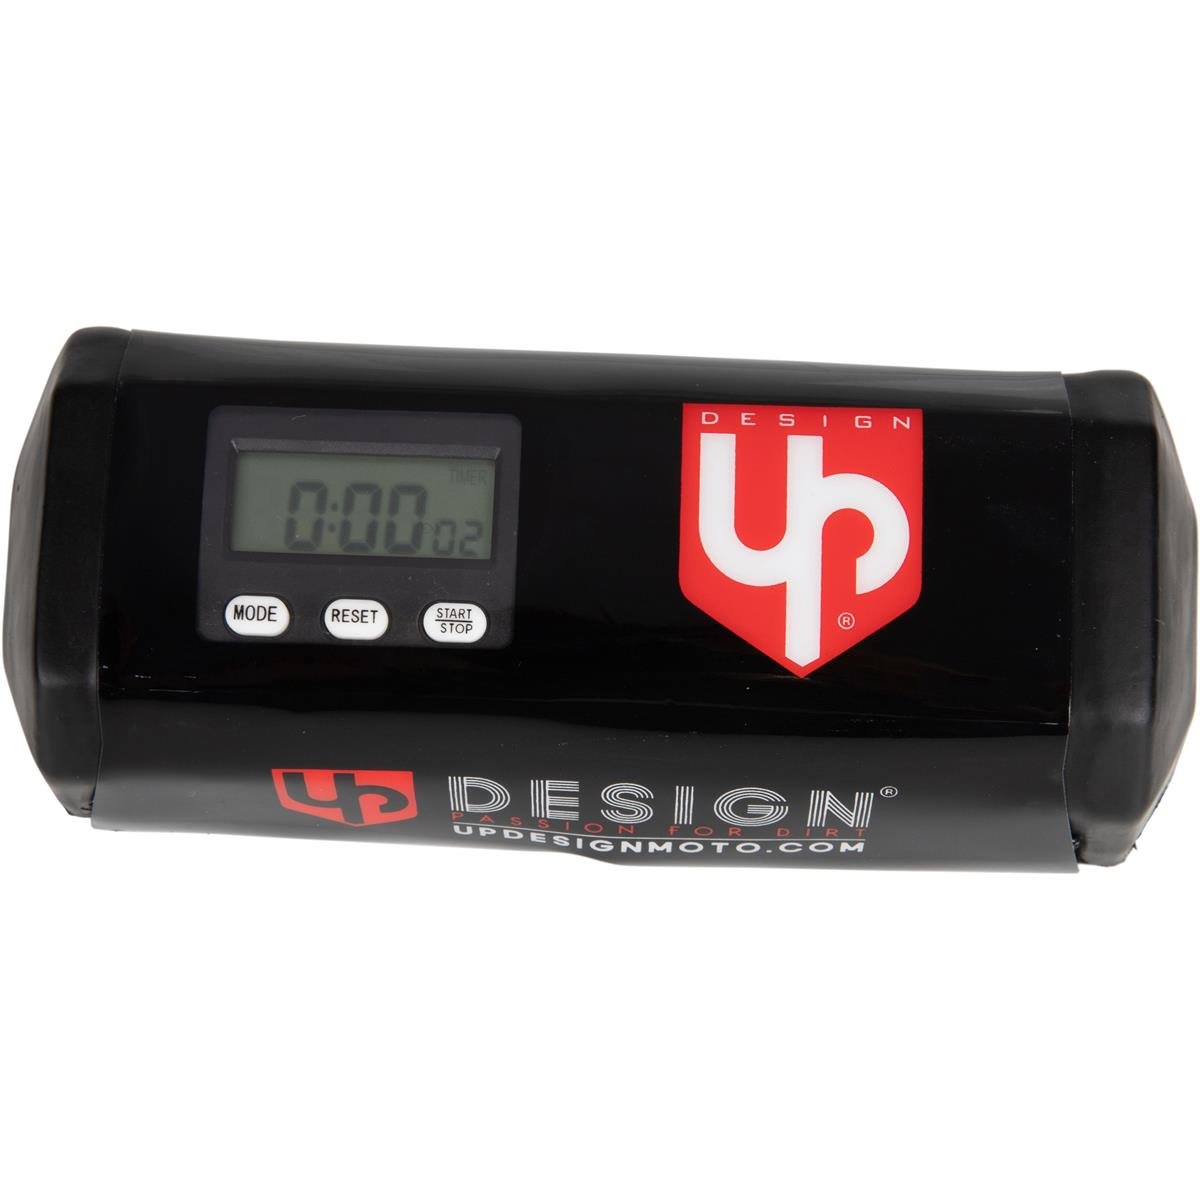 UPDESIGN Bar Pad Motocross Black, with clock and stop function